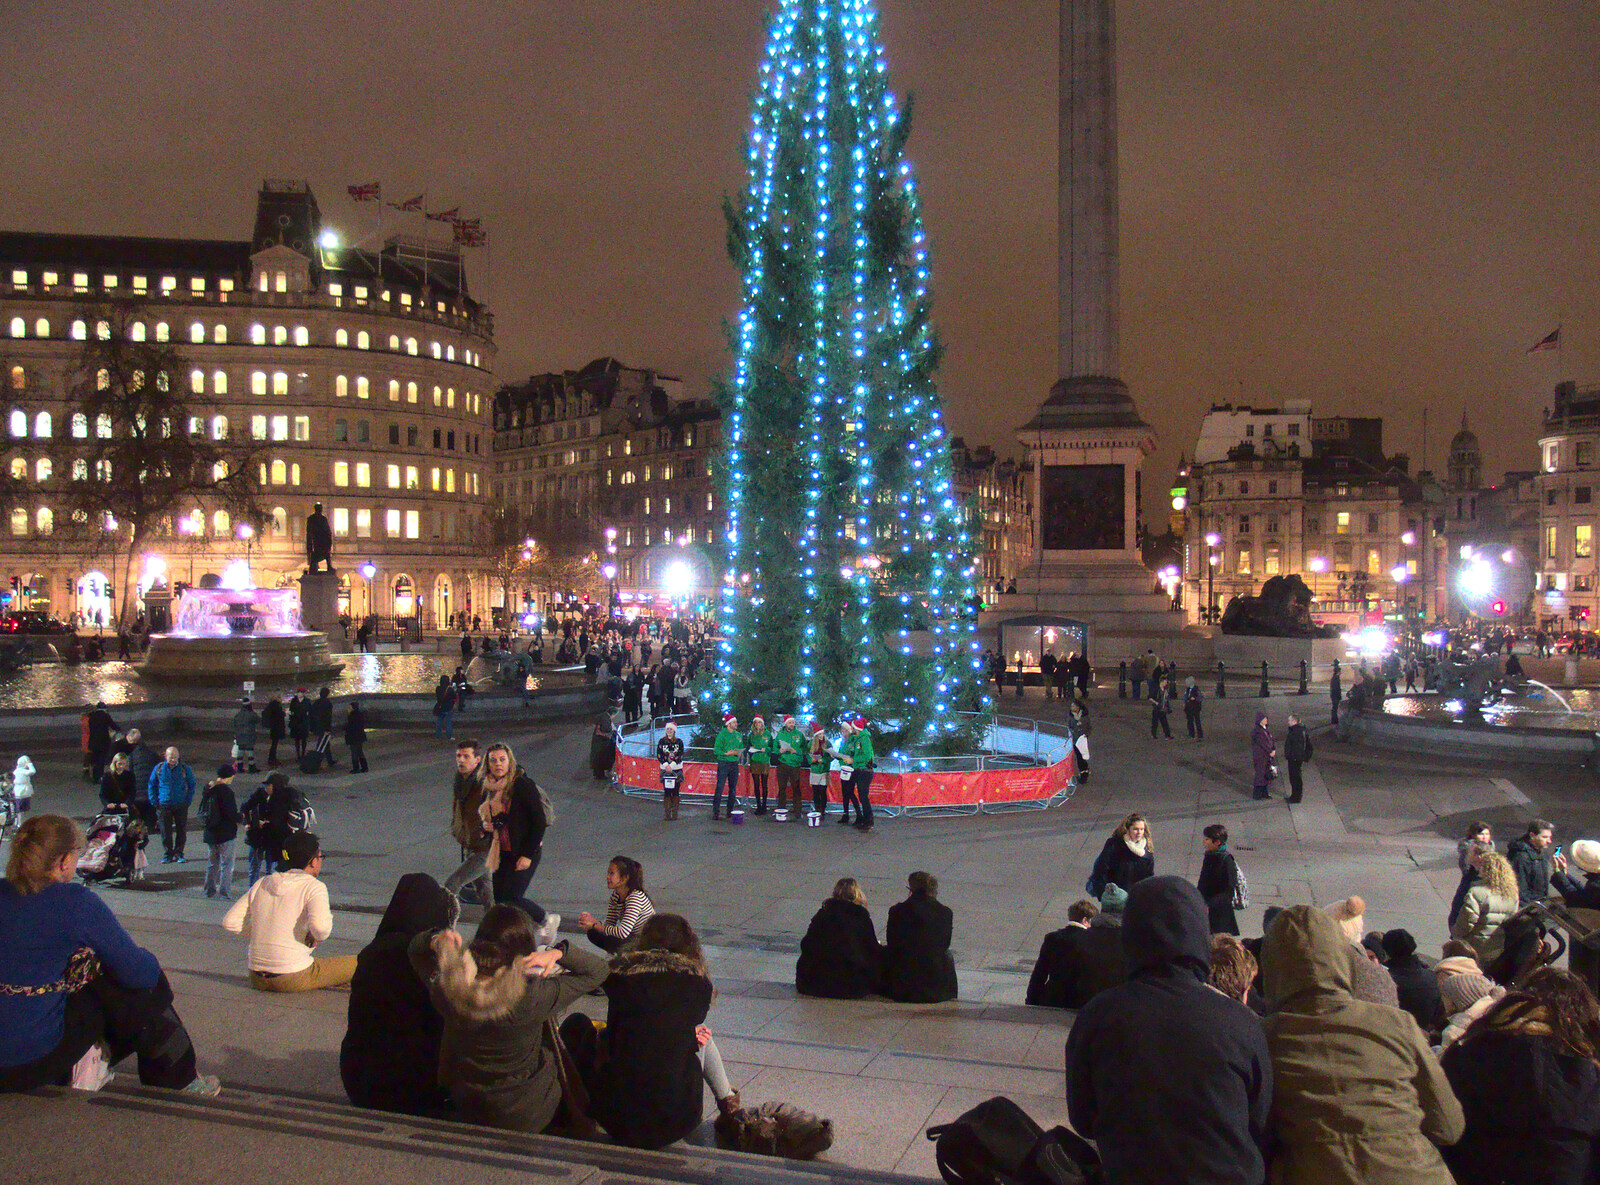 There's a little choir by the Christmas tree from SwiftKey Innovation Nights, Westminster, London - 19th December 2014